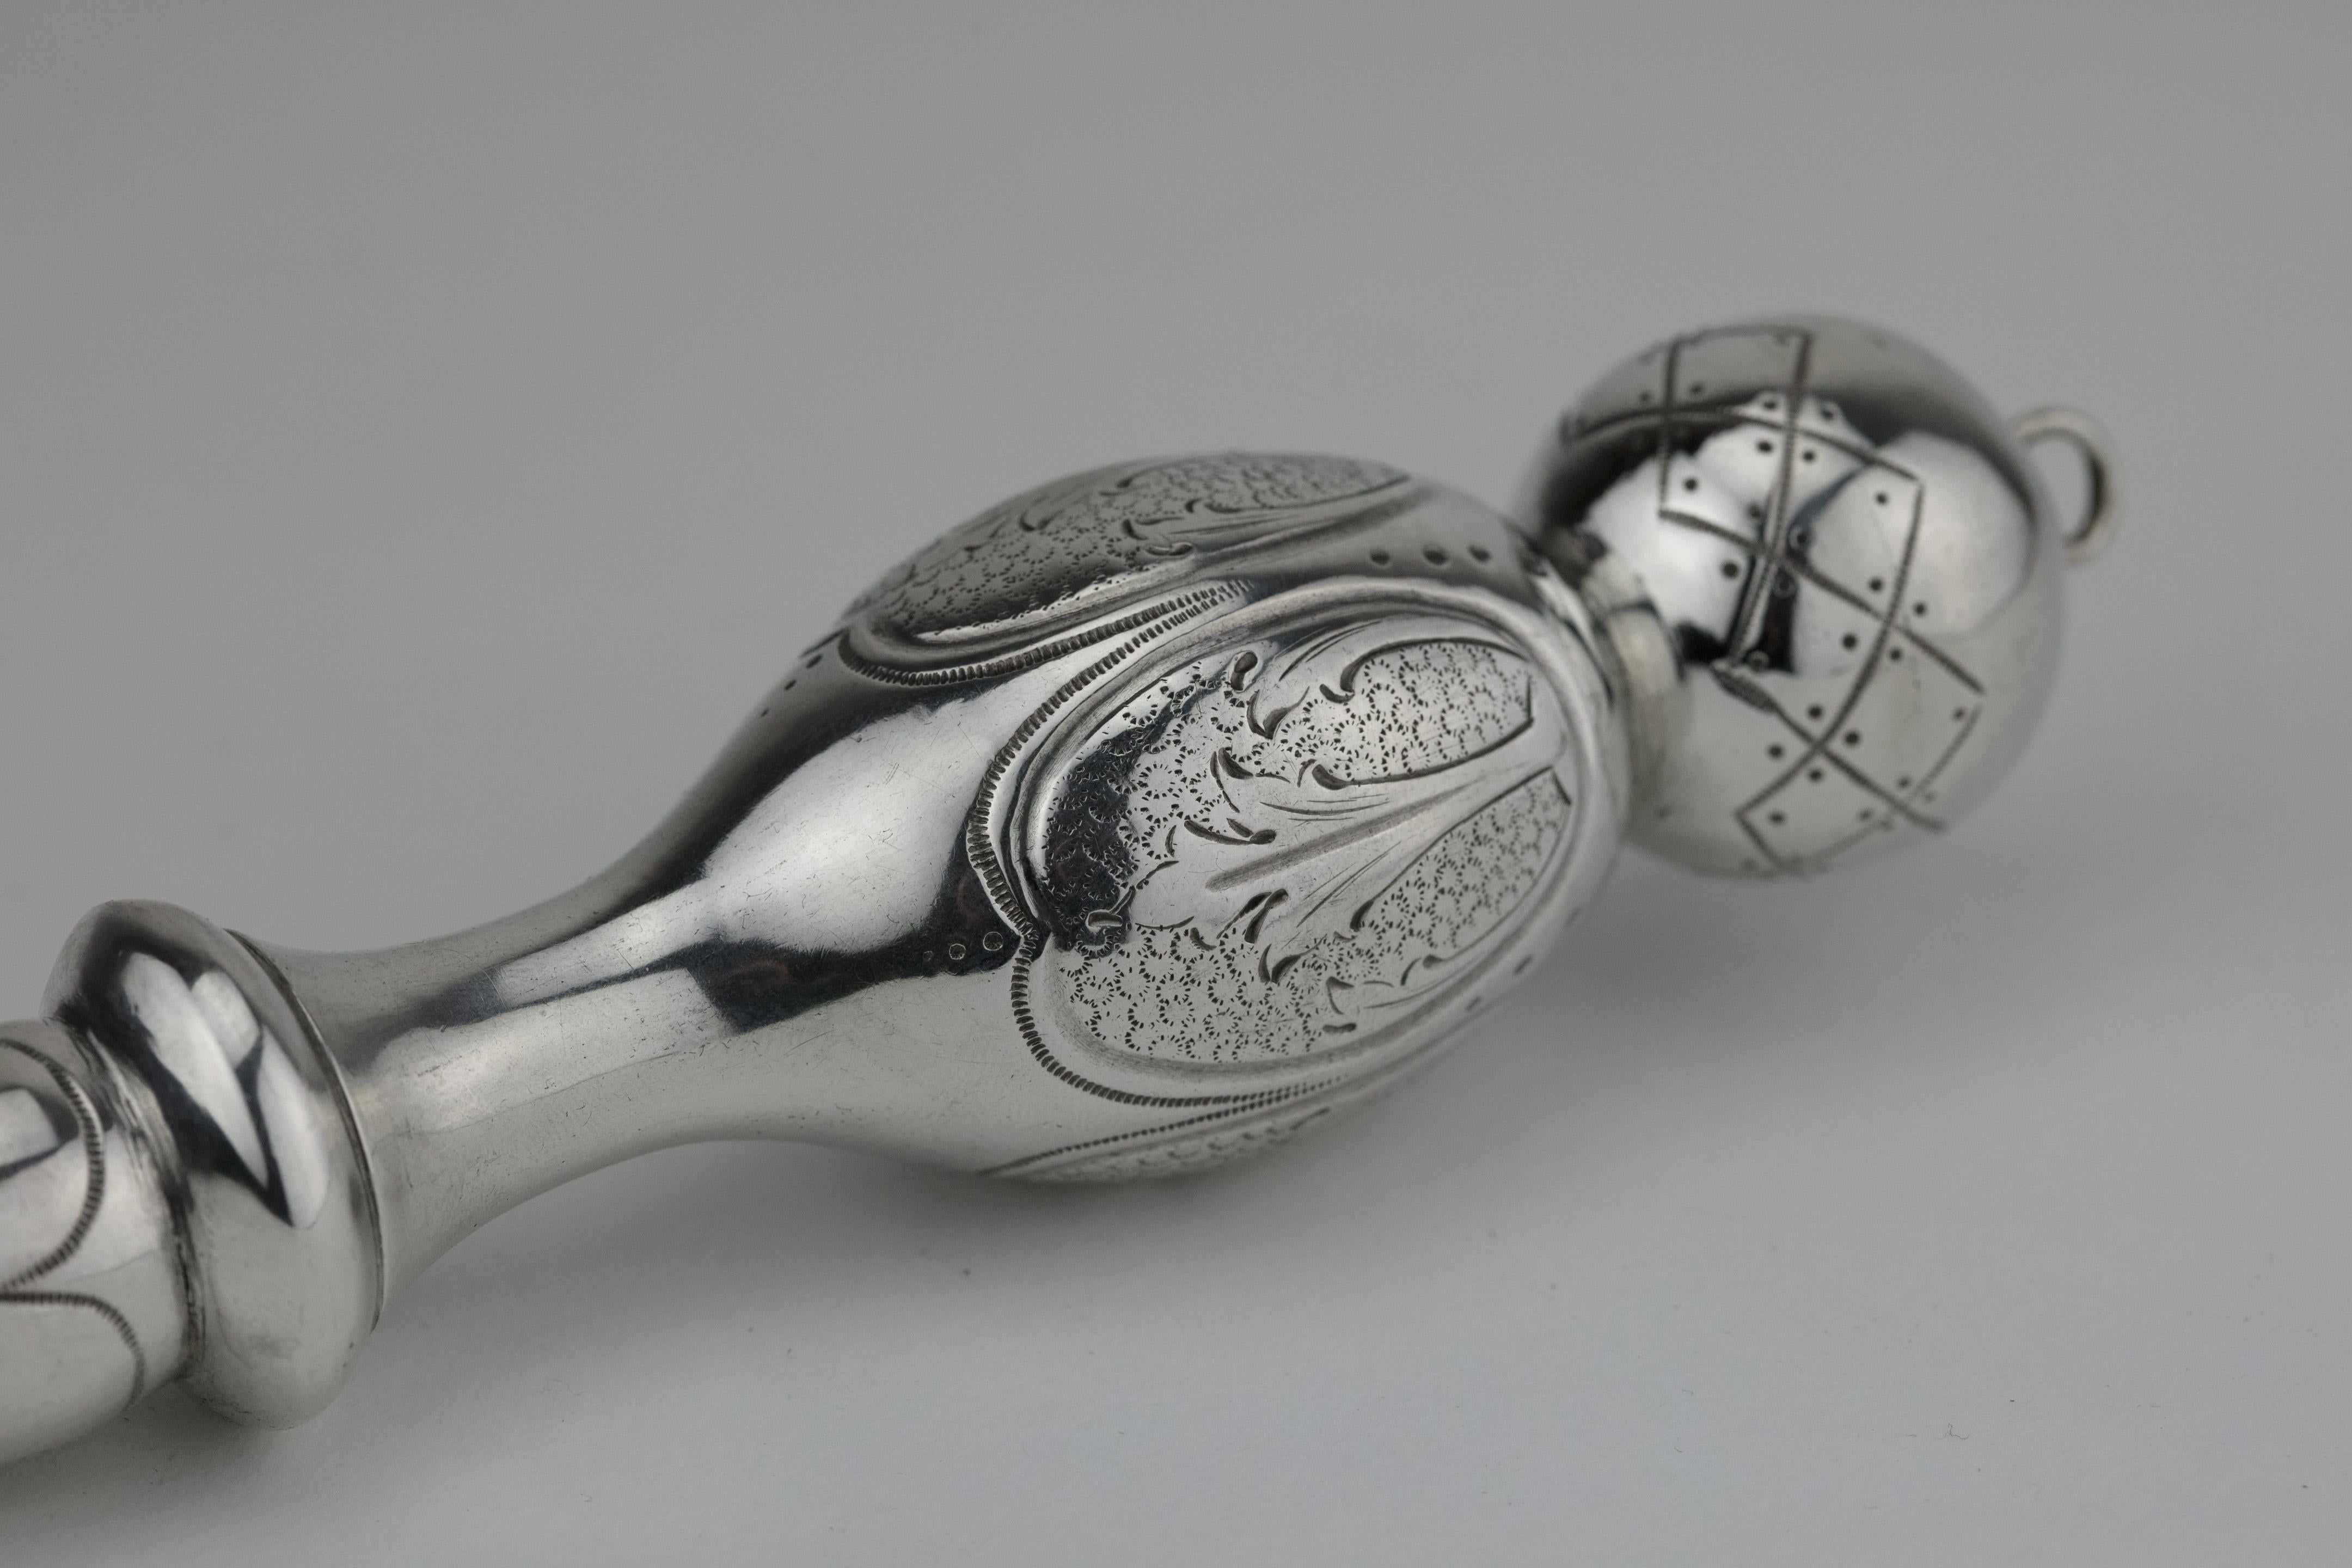 Handmade silver Torah pointer, Germany, circa 1890.
The handle is made with a knob shape interval engraved with floral ornaments.
The reading end is shaped as a hand with a pointing index finger. 
A suspension loop is connected to the top of